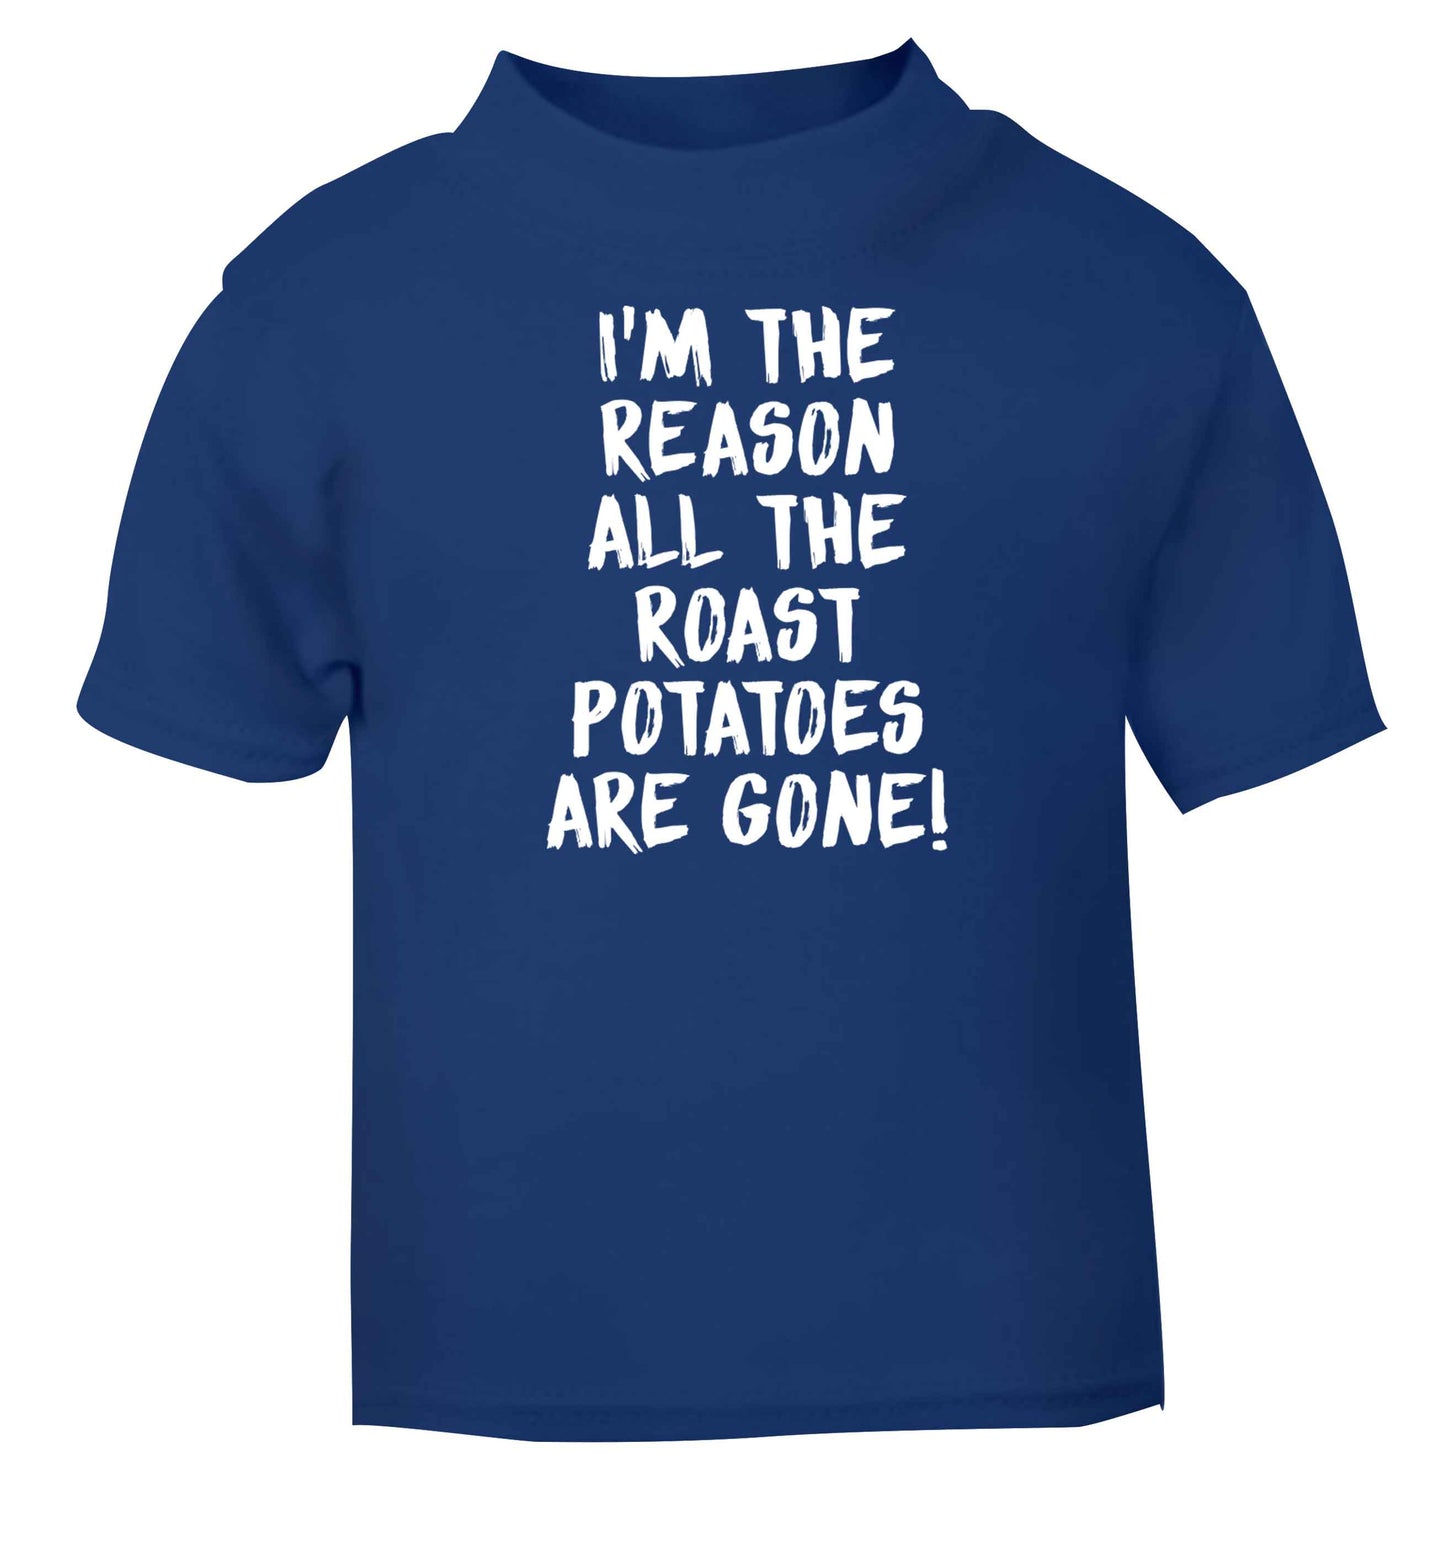 I'm the reason all the roast potatoes are gone blue baby toddler Tshirt 2 Years